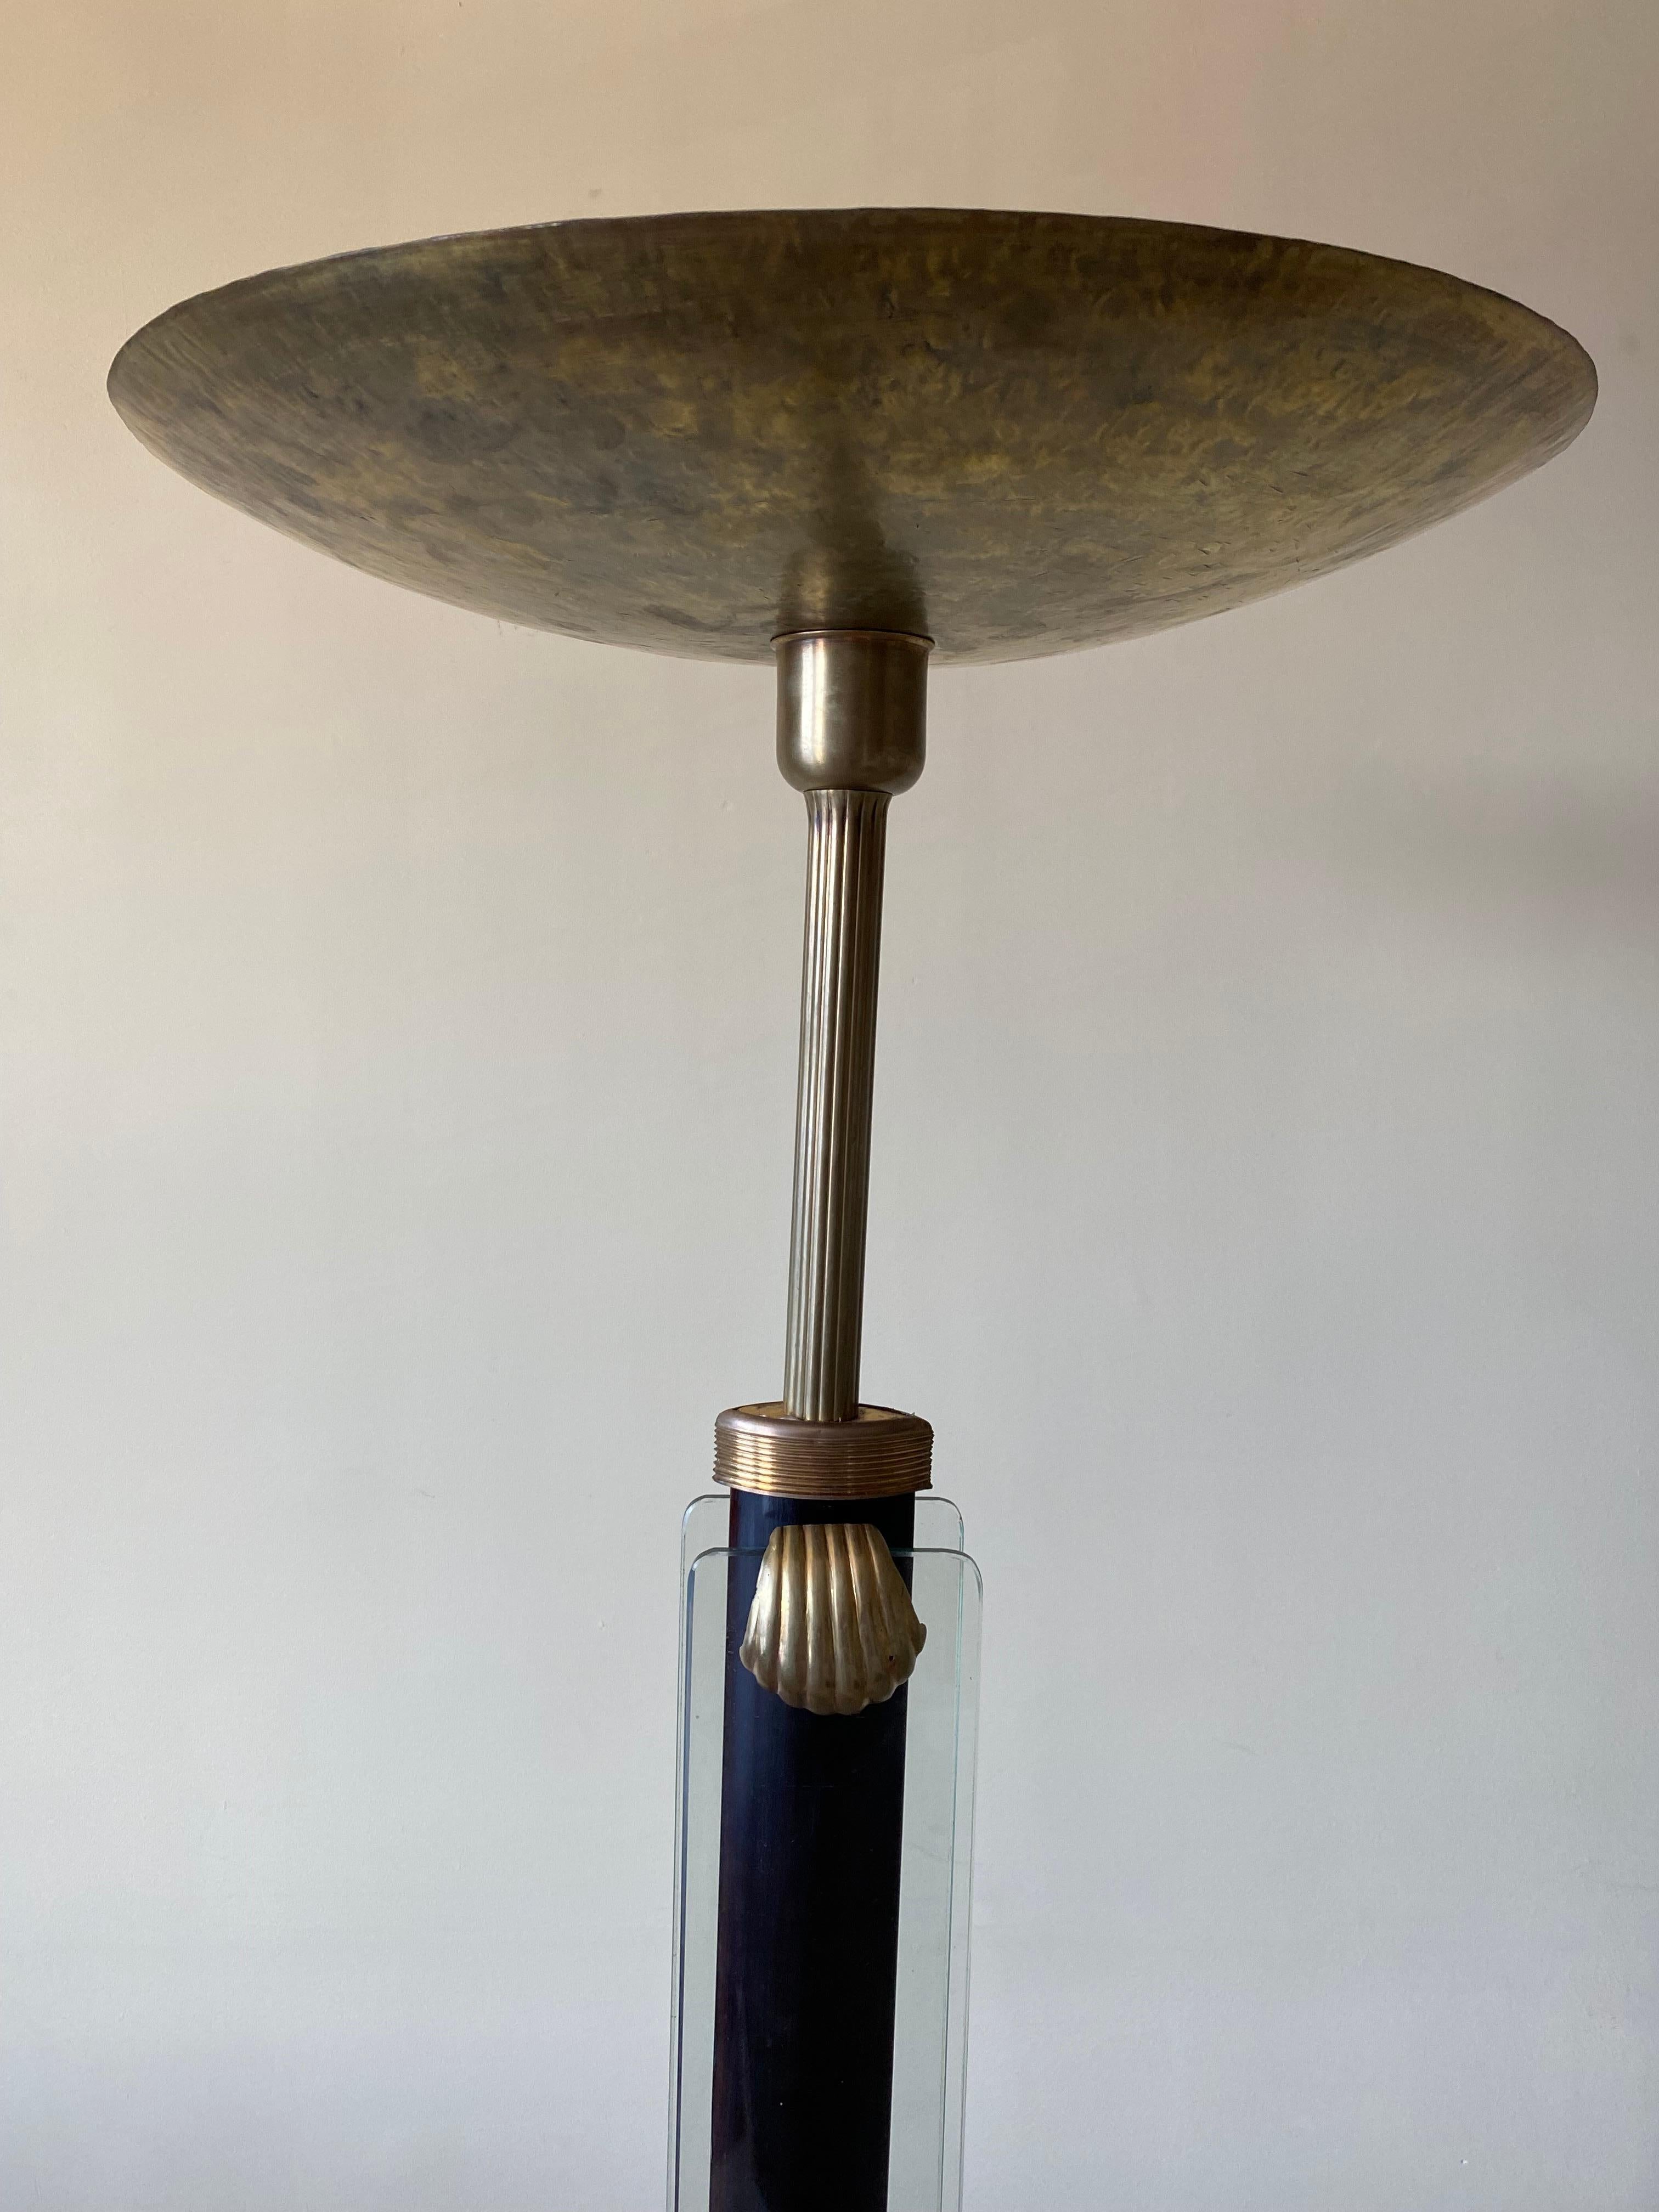 Beautifully patinated brass torchiere floor lamp attributed to Pietro Chiesa for Fontana Arte, circa 1930s.

Glass panels run along the center column. Fastened to the ebonized wood with washer/nuts and covered in decorative brass shell clips.